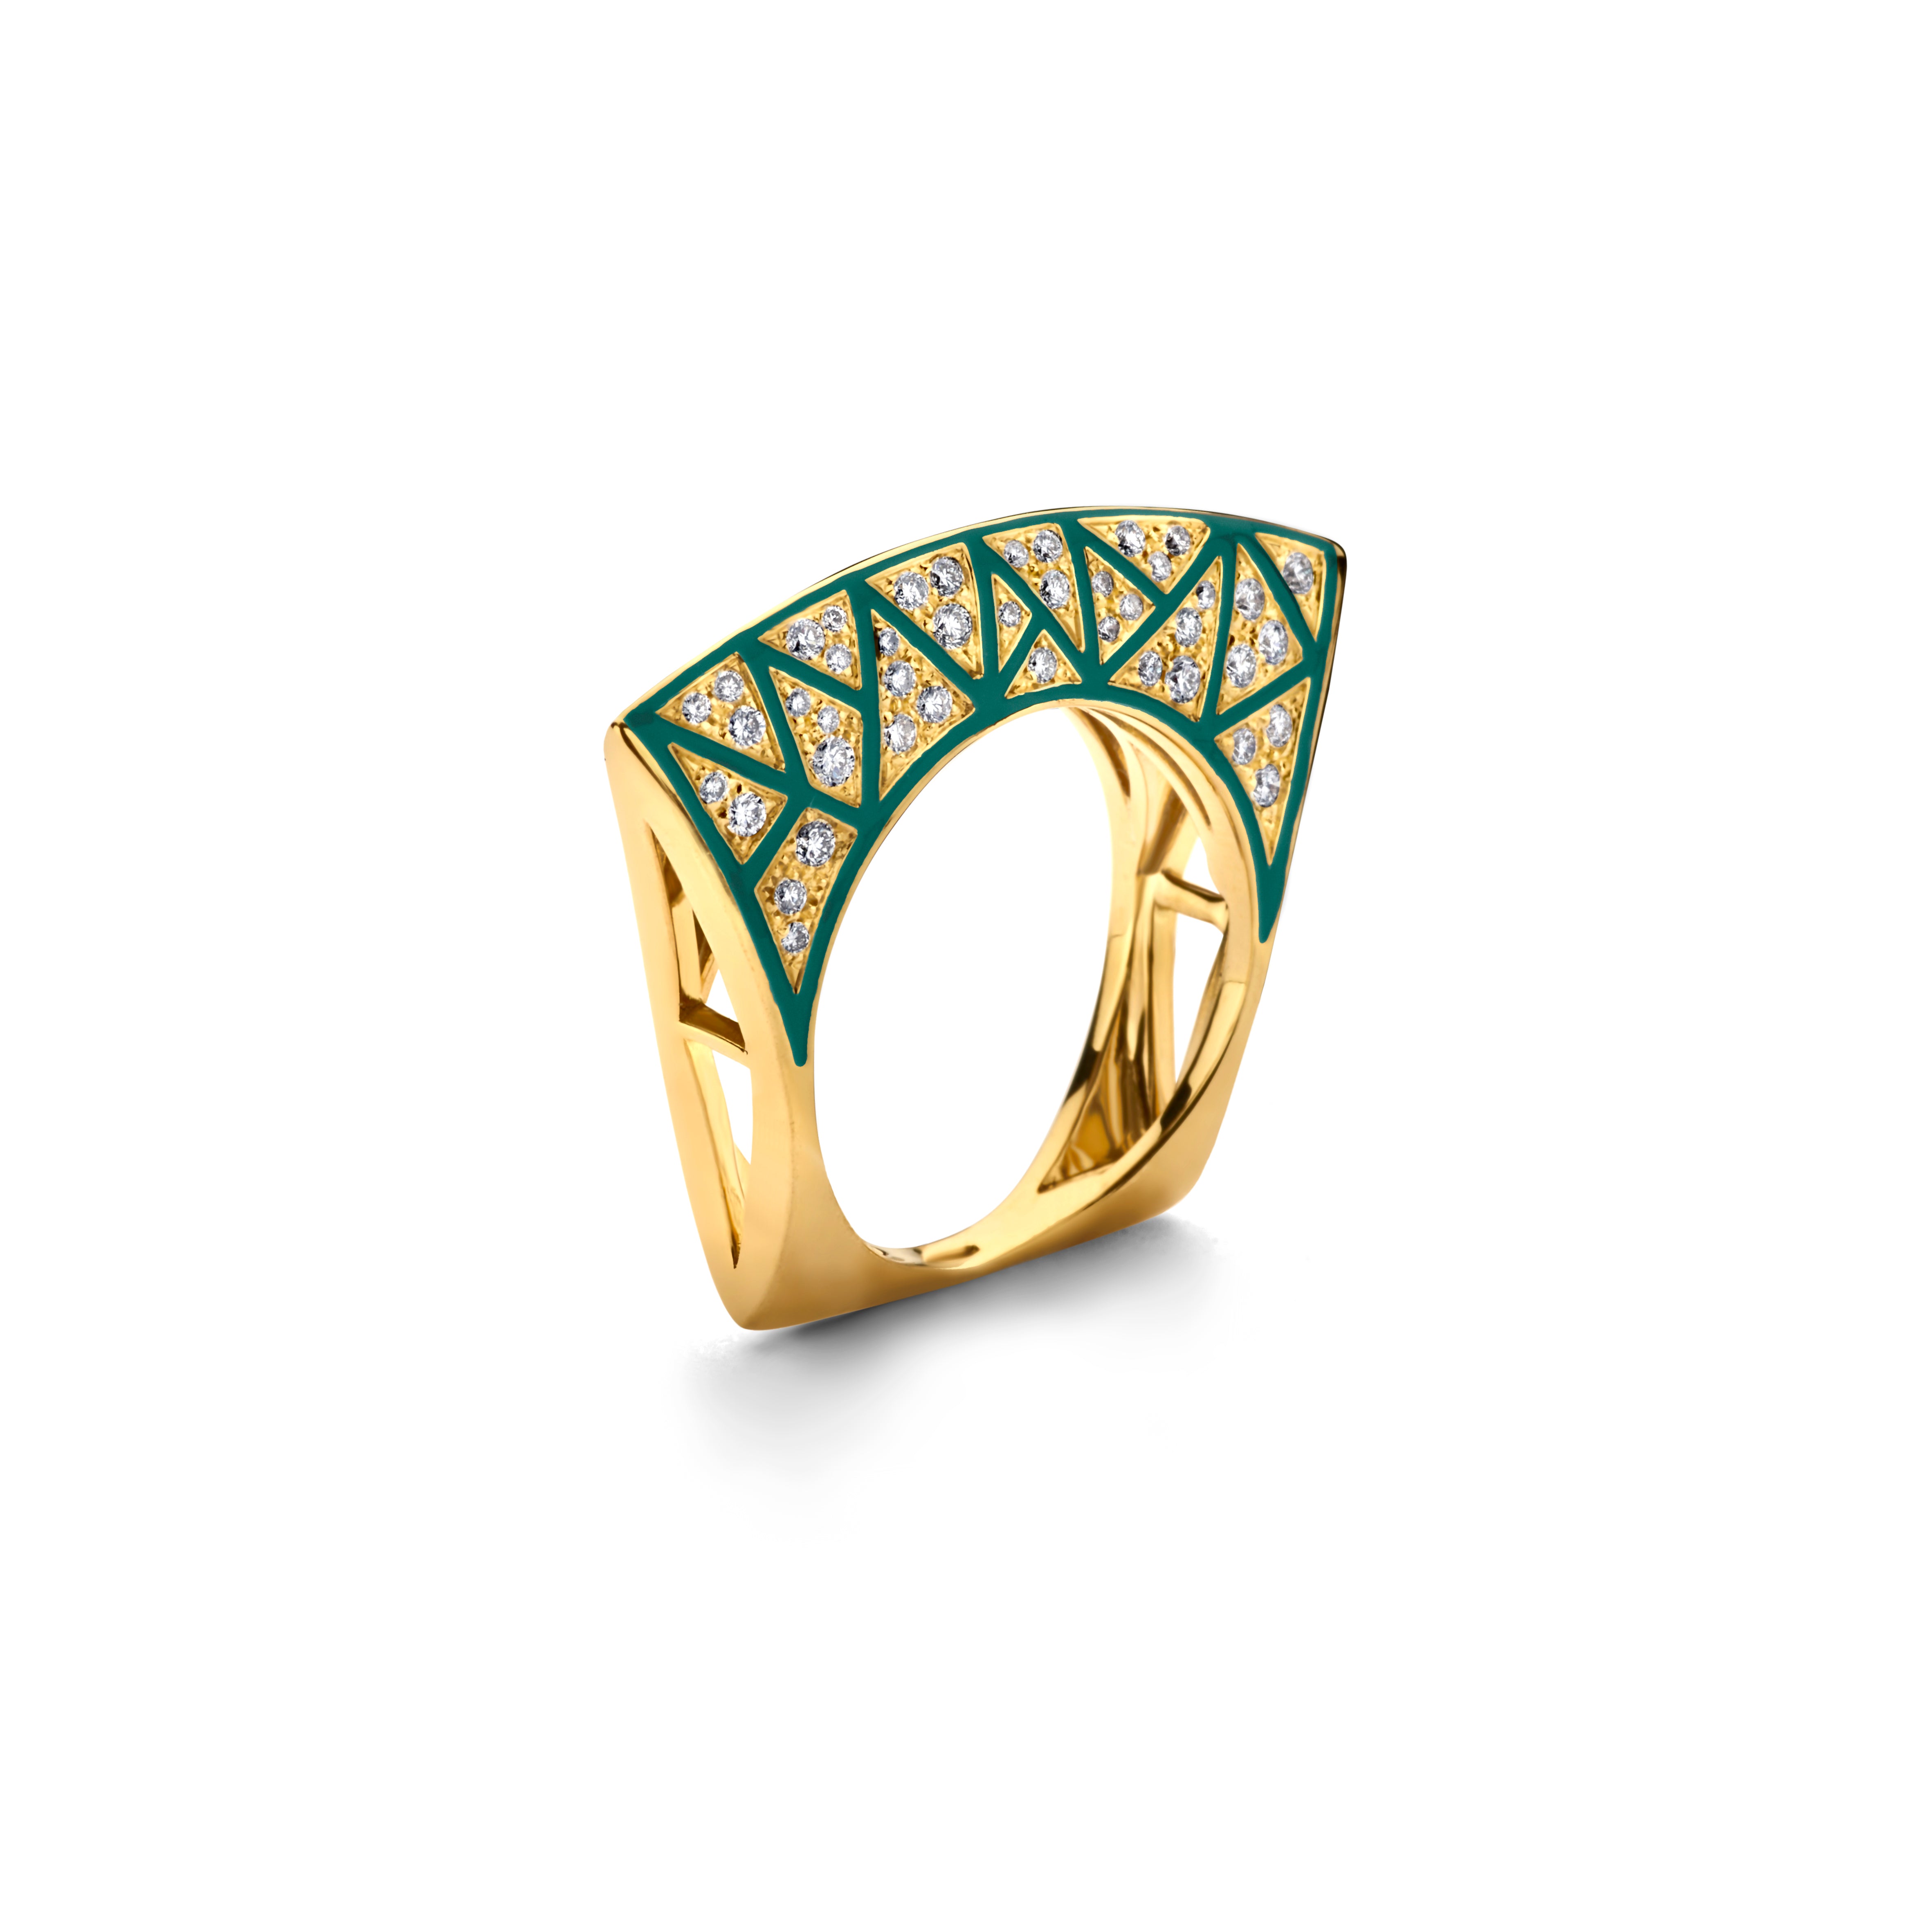 LOTUS RING IN YELLOW GOLD AND GREEN ENAMEL WITH WHITE DIAMONDS